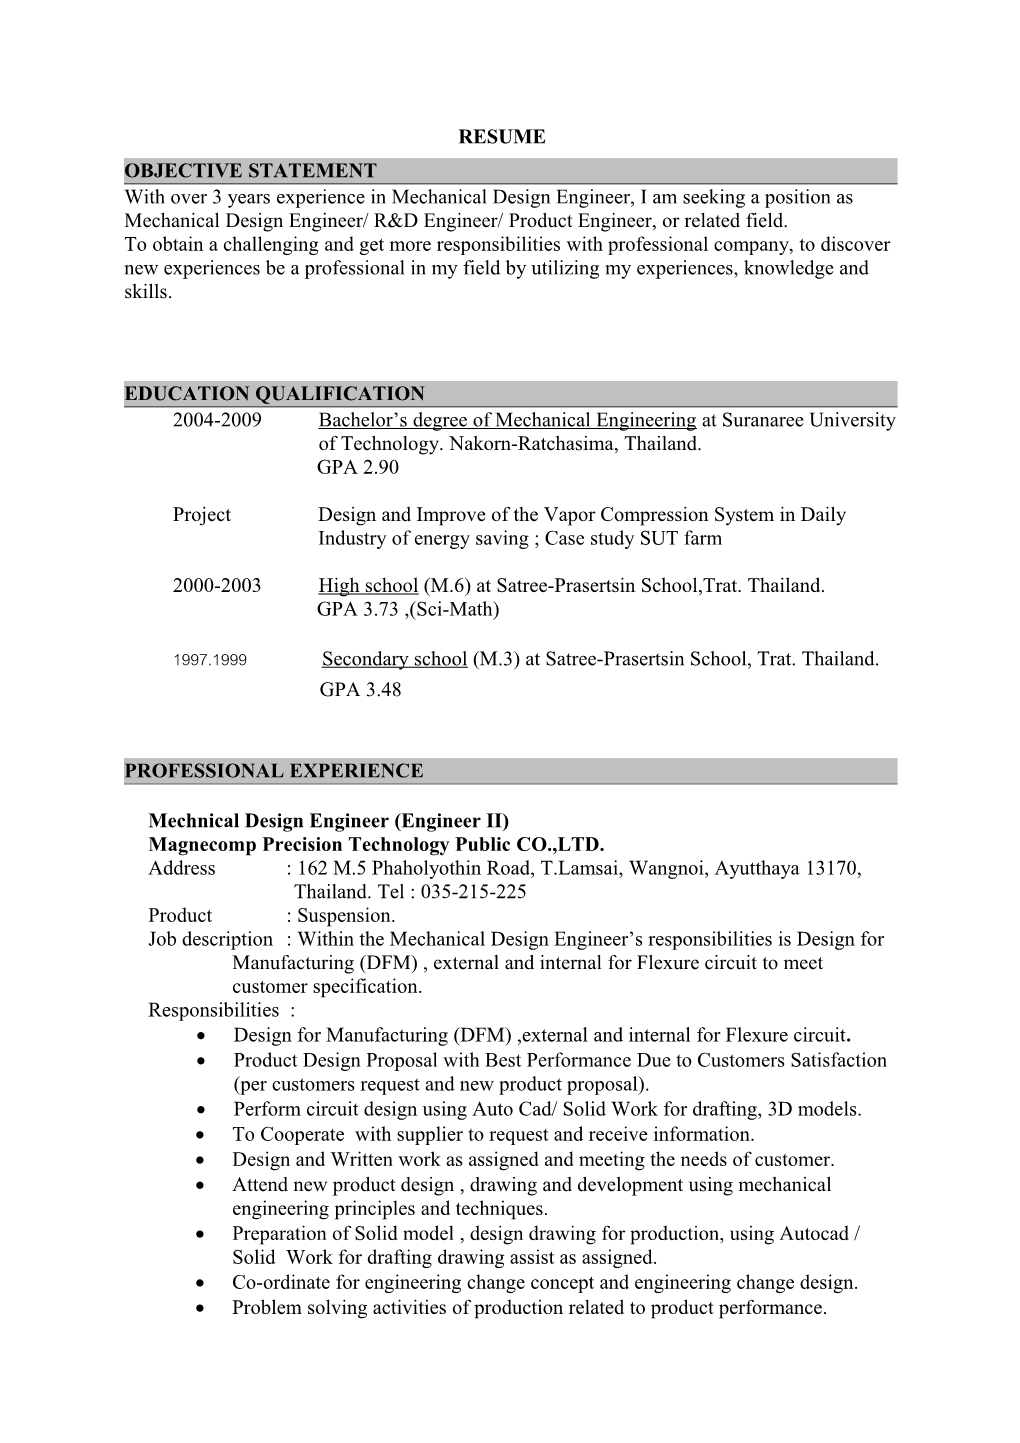 With Over 3 Years Experience in Mechanical Design Engineer, I Am Seeking a Position As